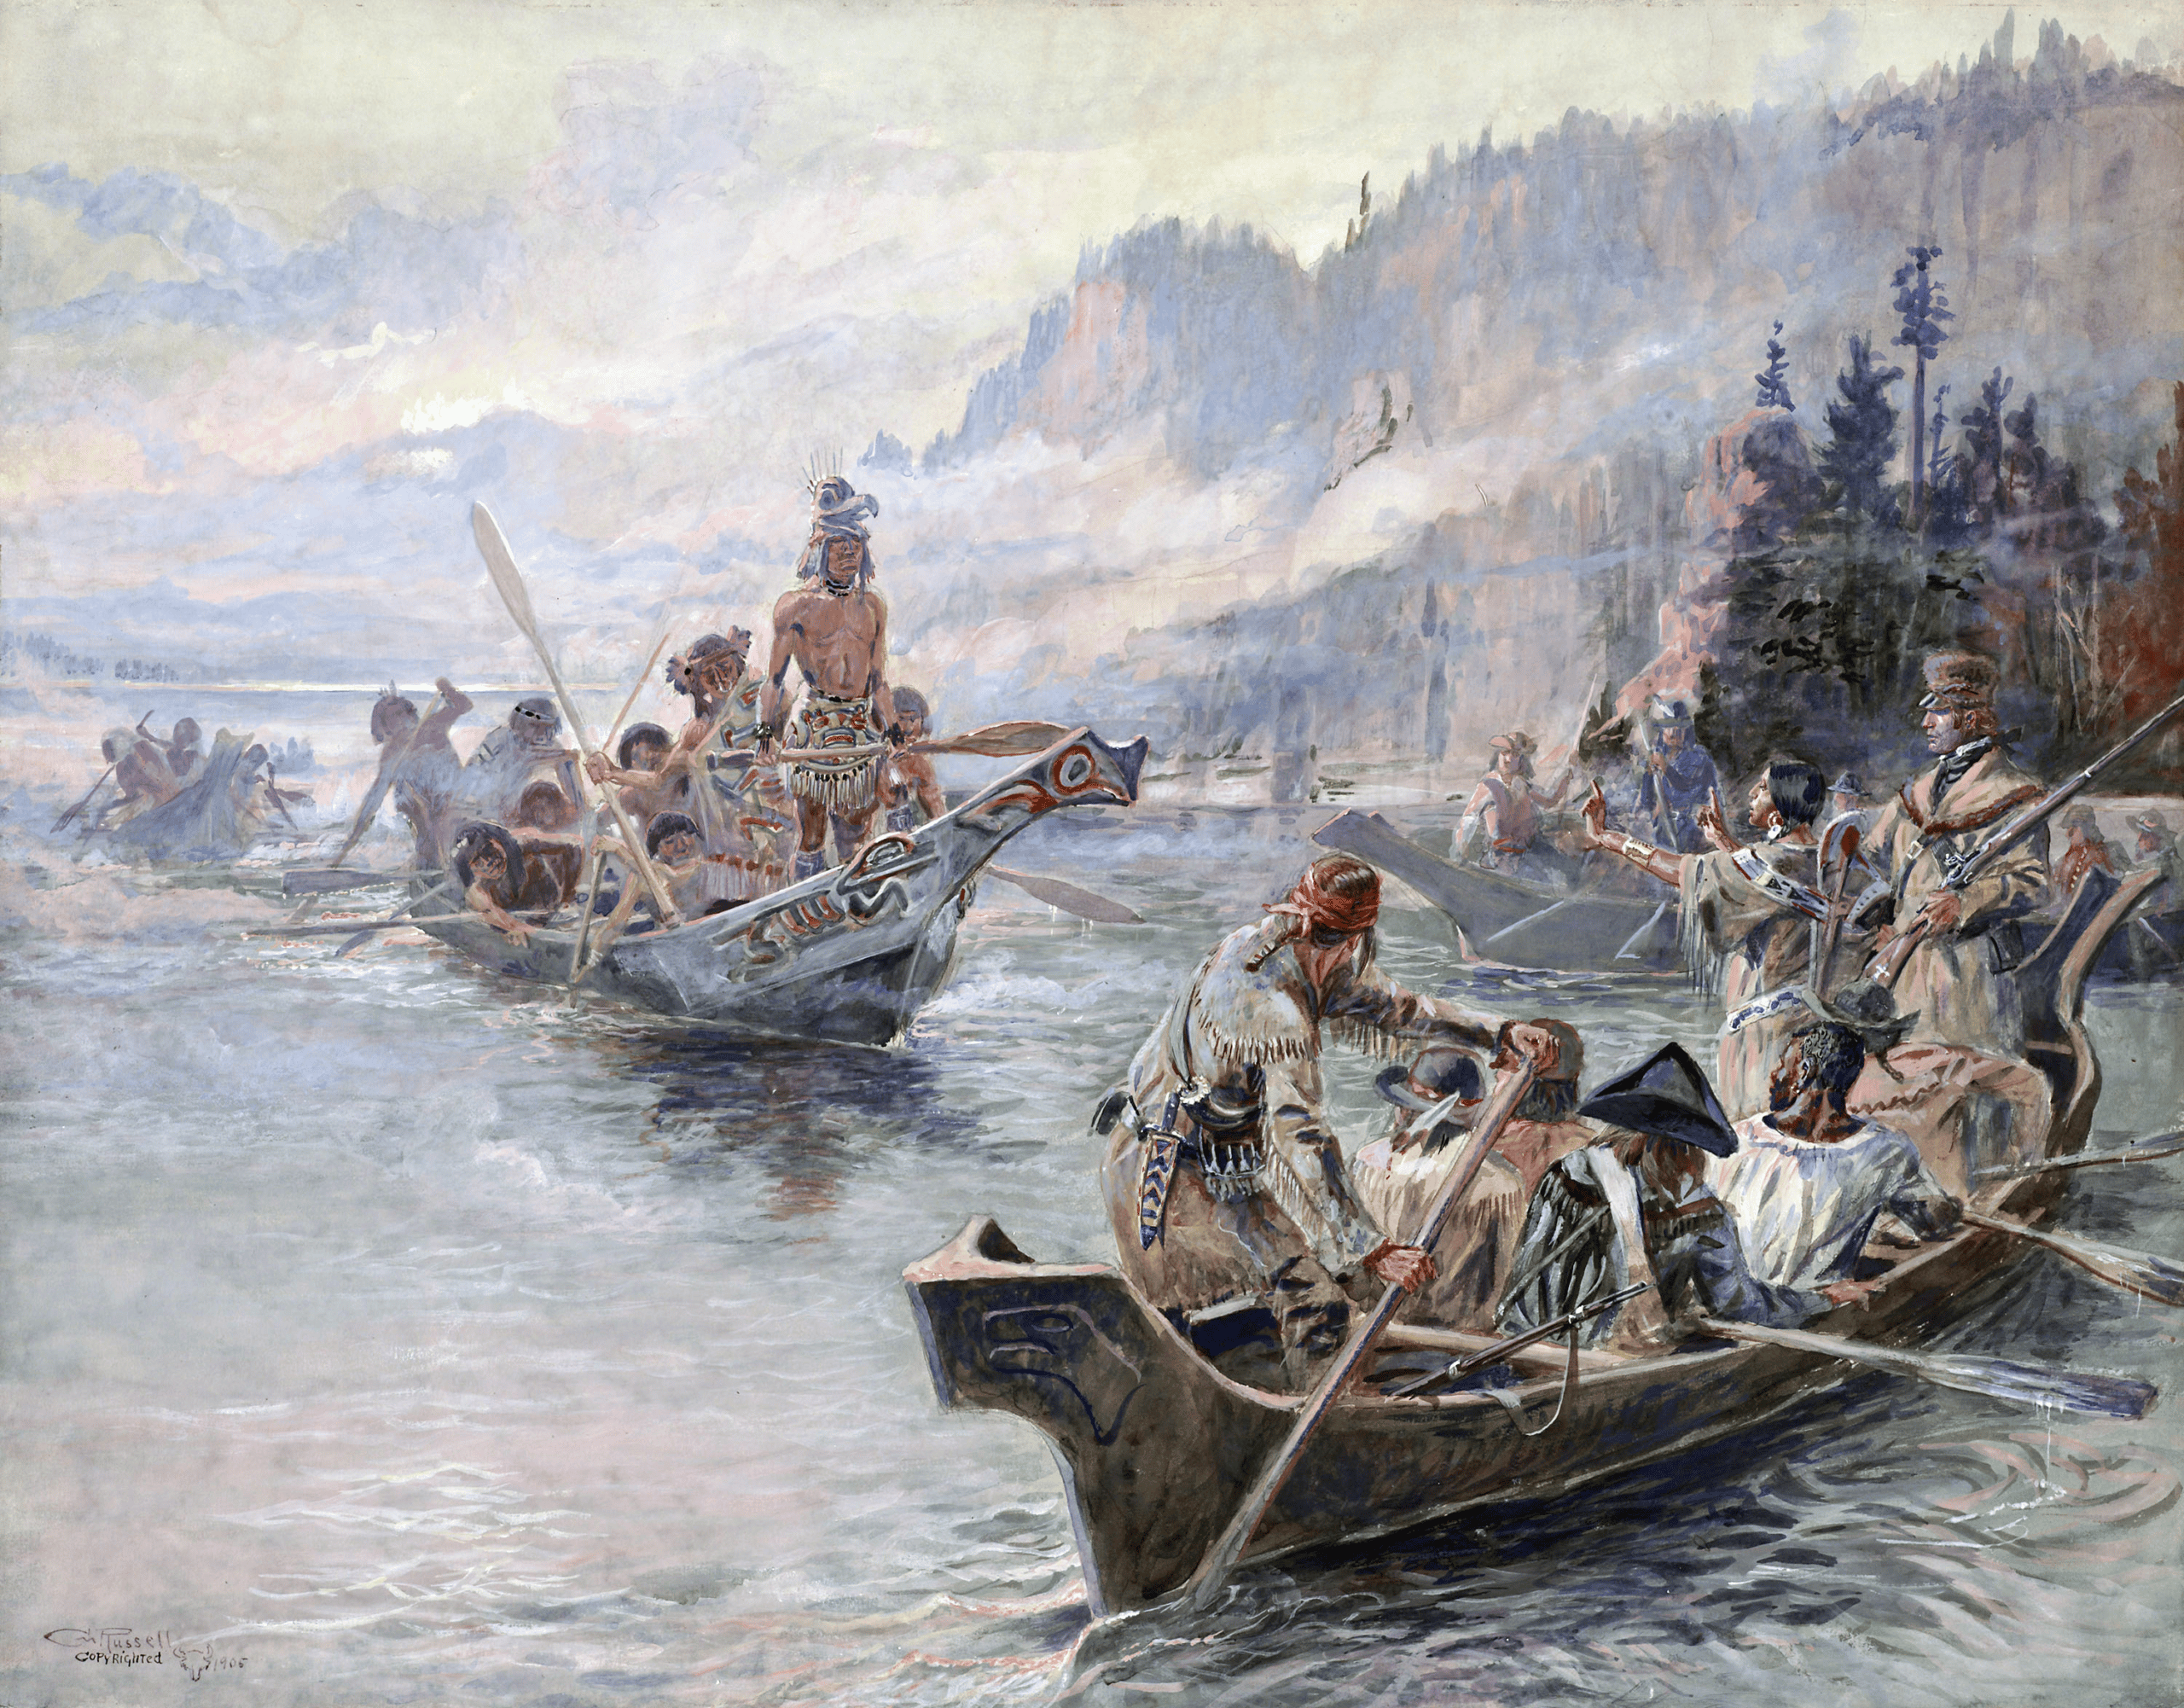 Painting of the Lewis and Clark expedition in a canoe meeting some Native Americans (1905), by Charles Marion Russell 